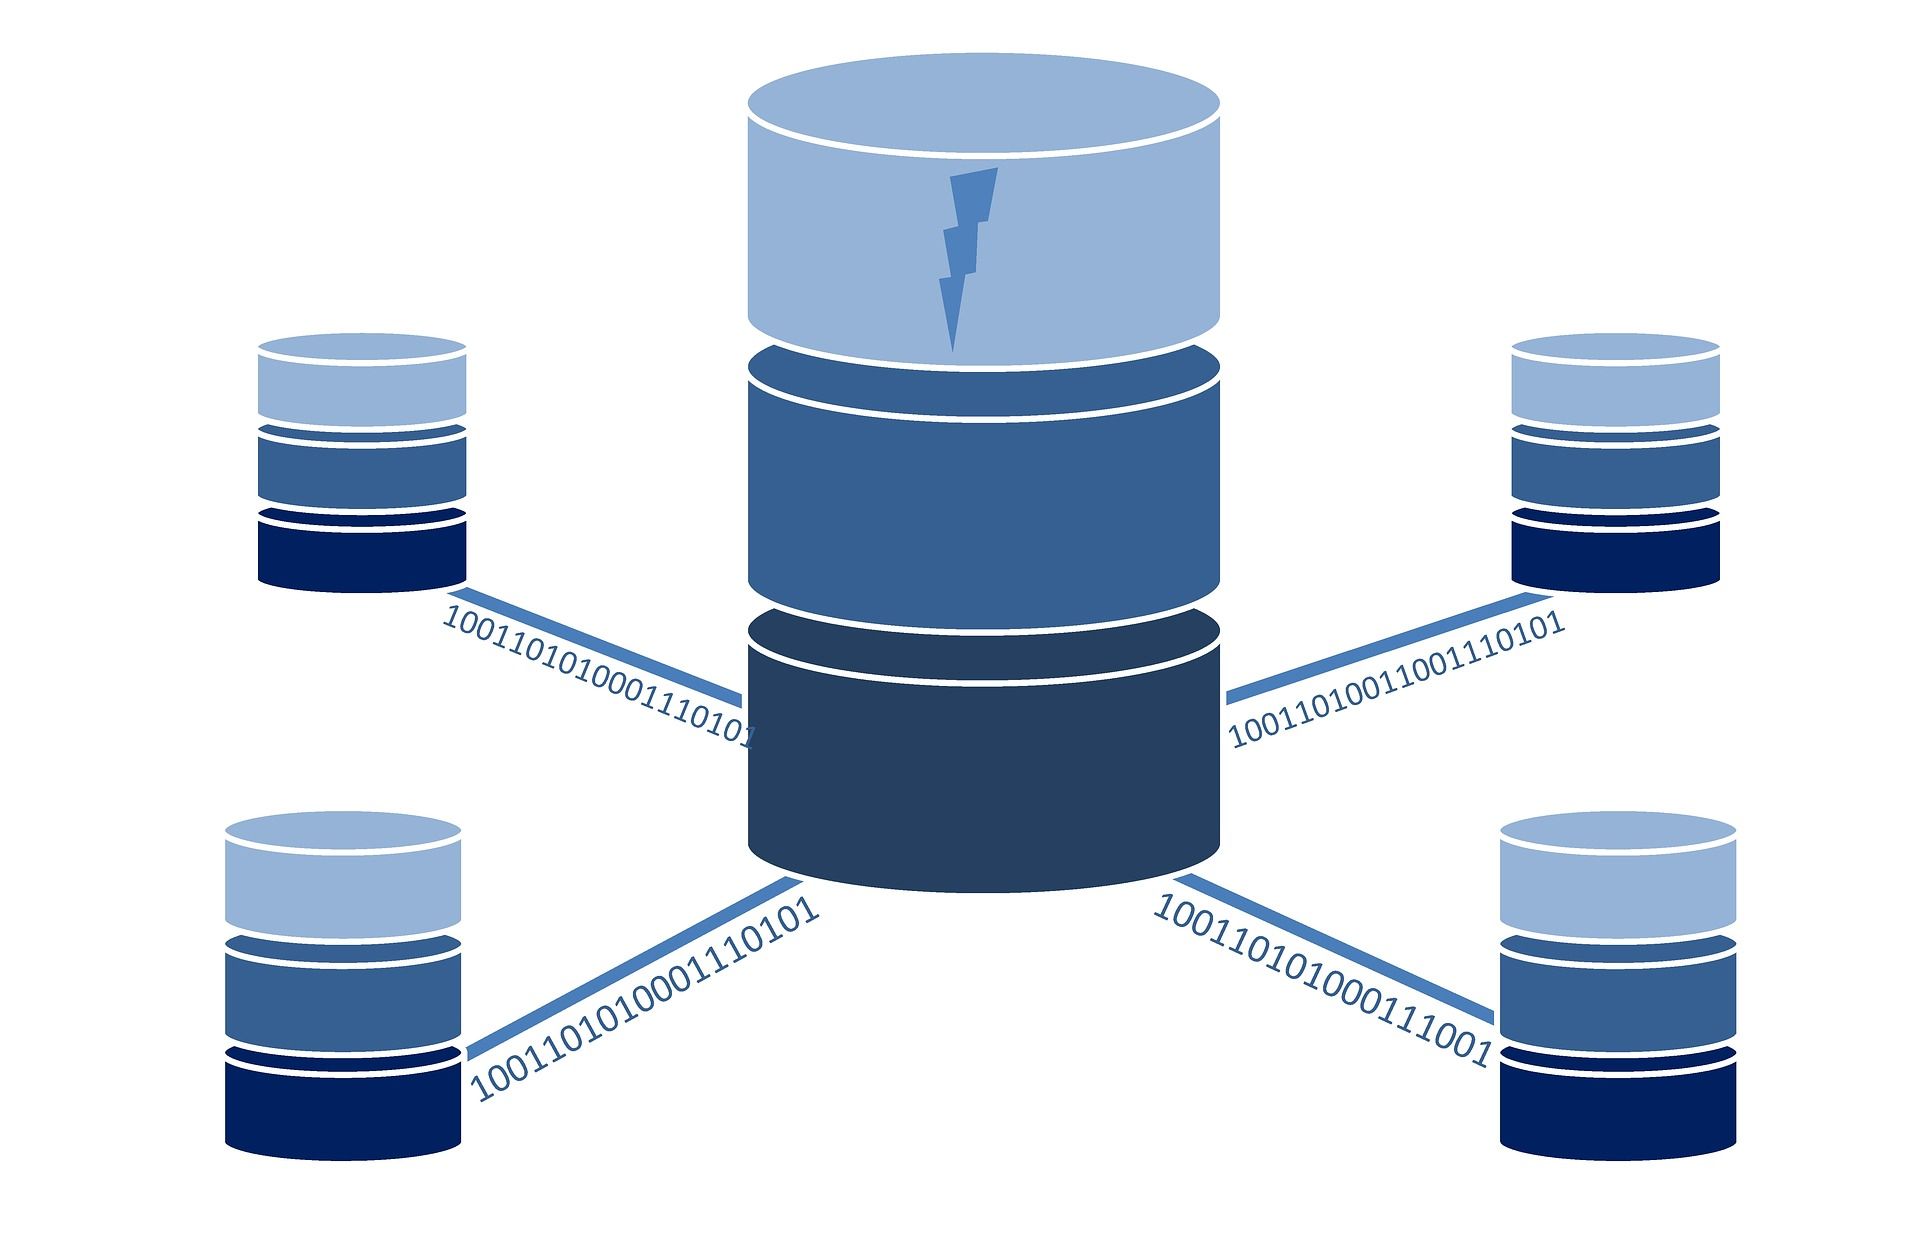 Replication is one of the common ways to implement database scalability